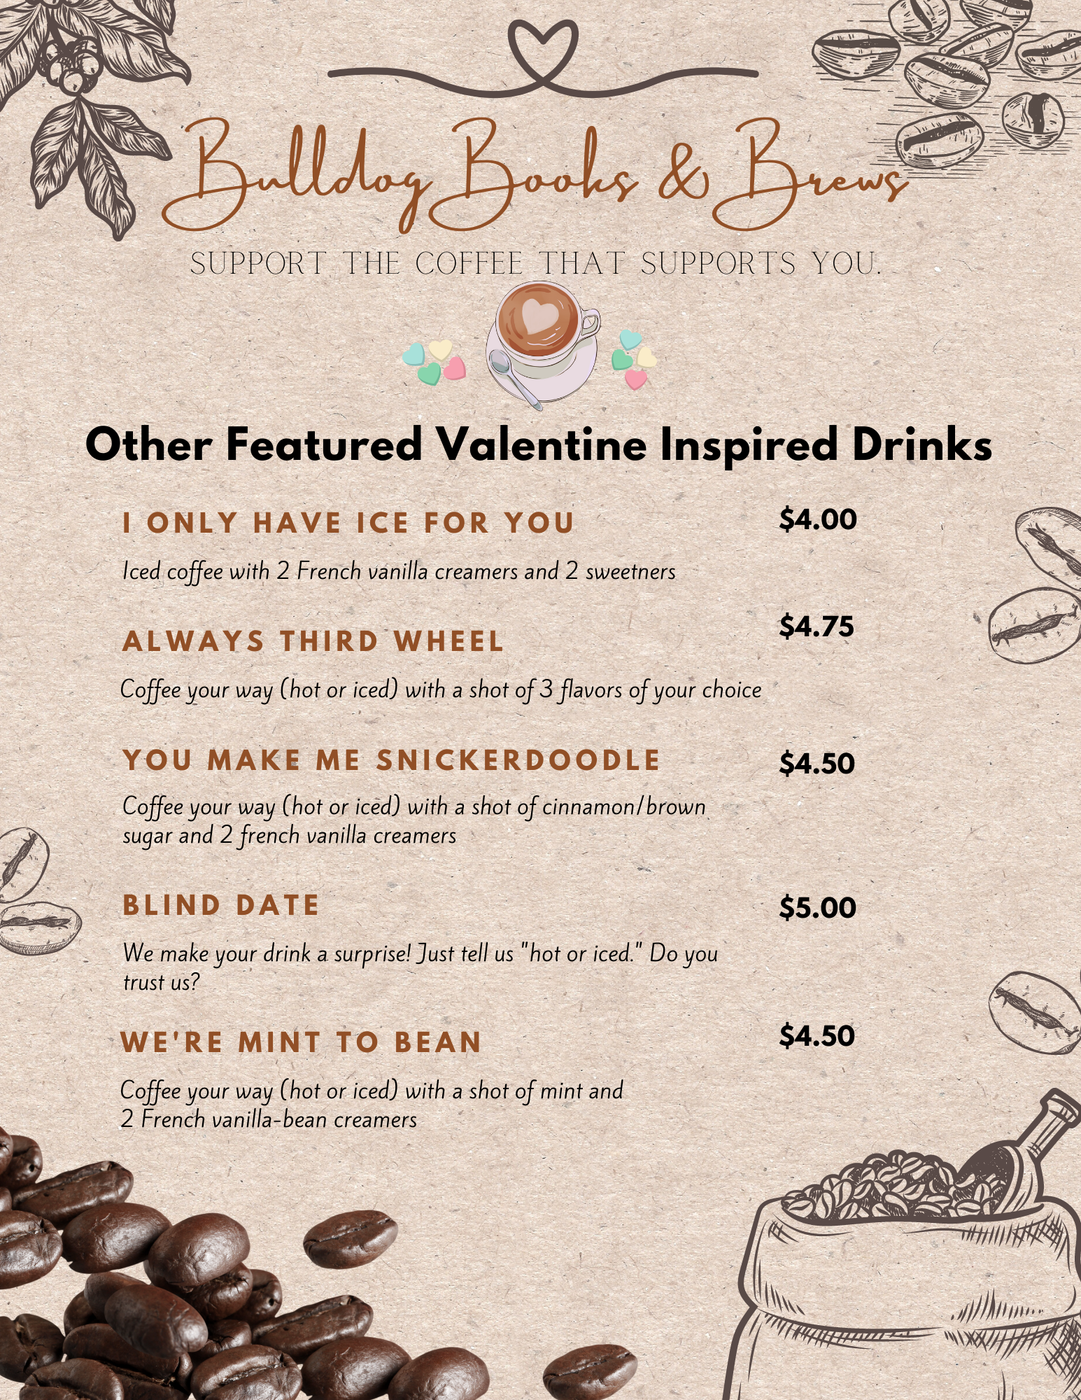 Bulldogs+Books+and+Brews+Introduces+New+Valentines+Flavors%21